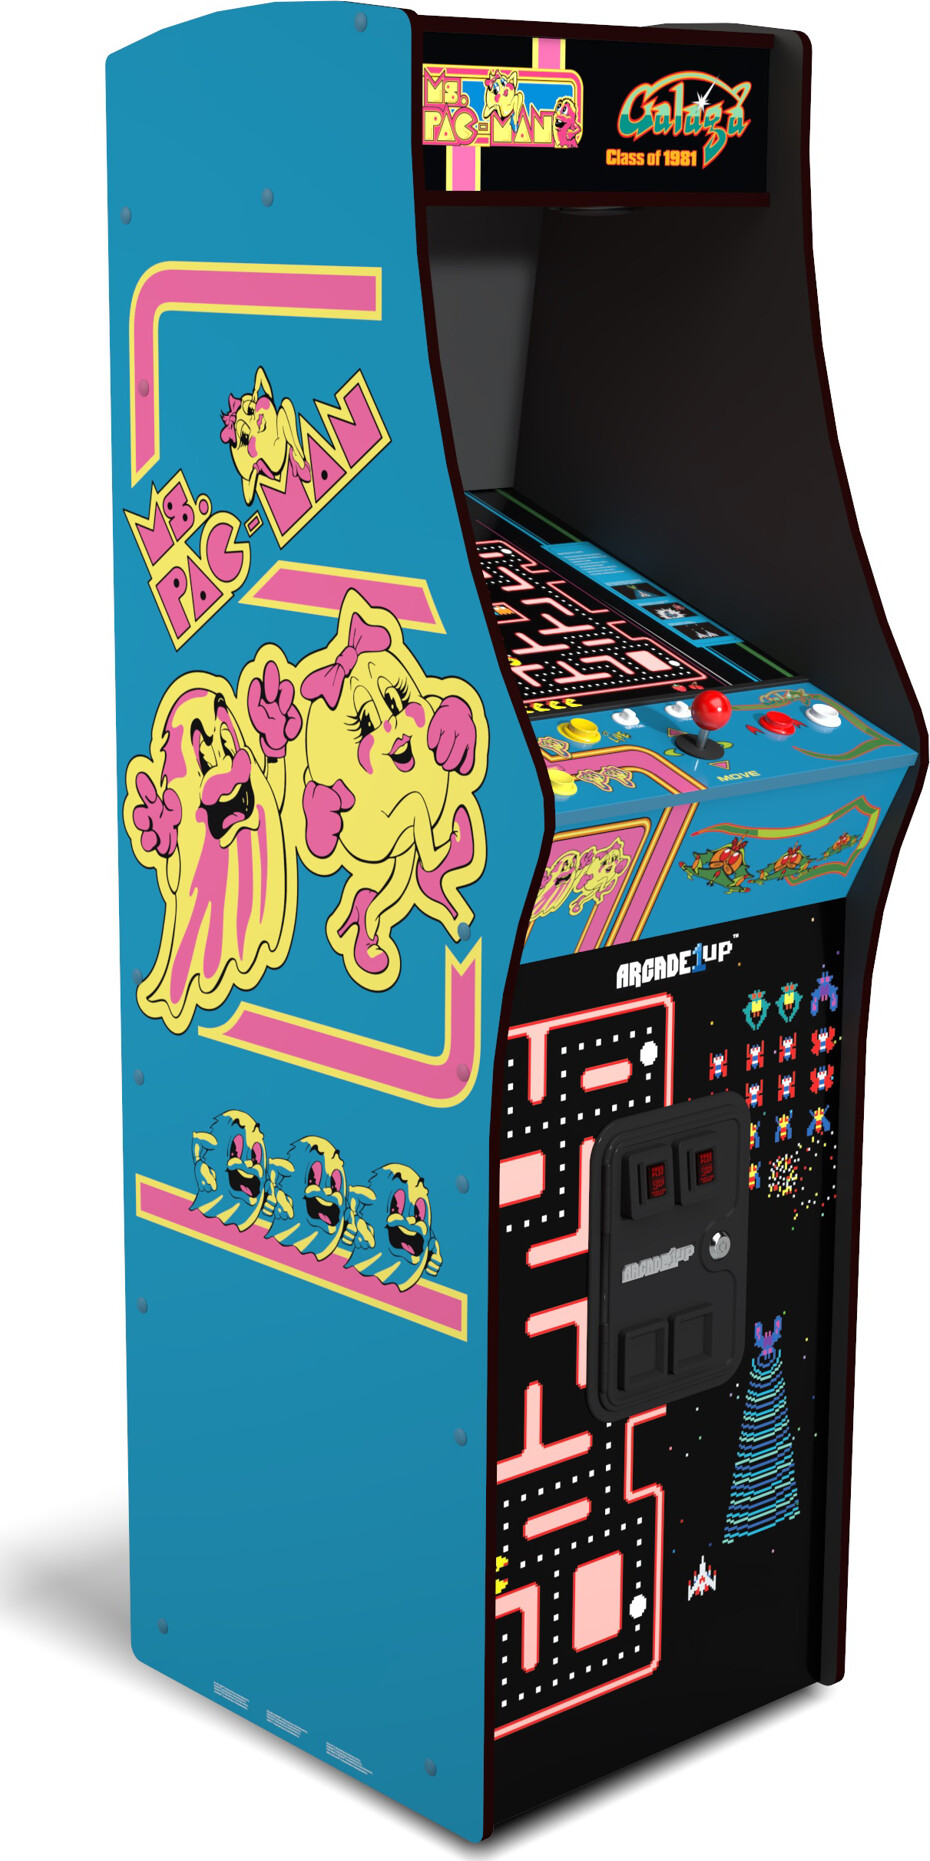 Billede af Arcade 1 Up - Ms. Pac-man Vs Galaga - Class Of 81 - Deluxe Arcade Machine